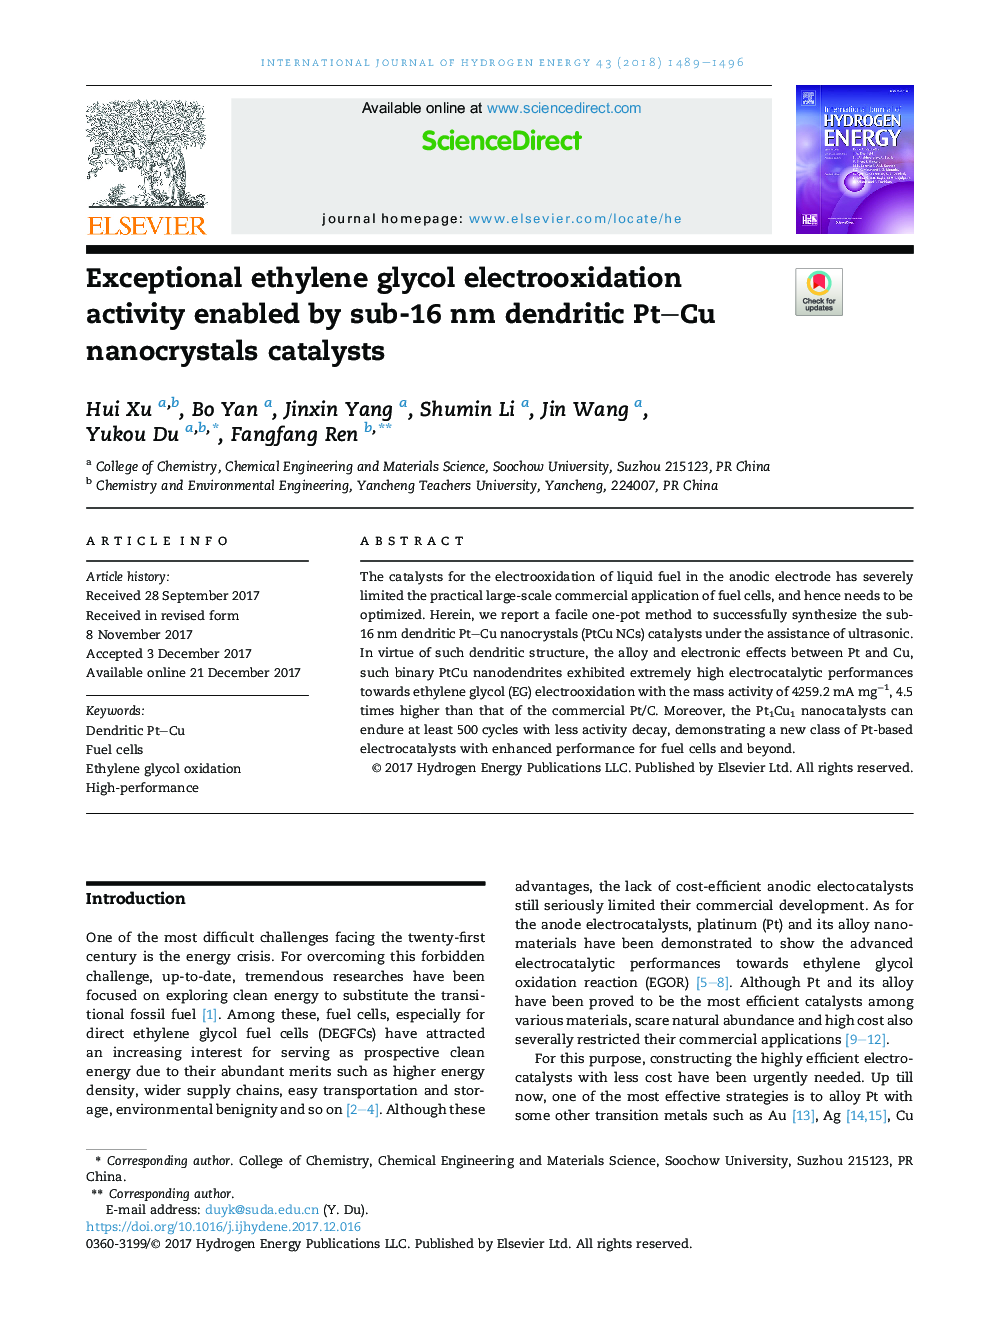 Exceptional ethylene glycol electrooxidation activity enabled by sub-16Â nm dendritic Pt-Cu nanocrystals catalysts